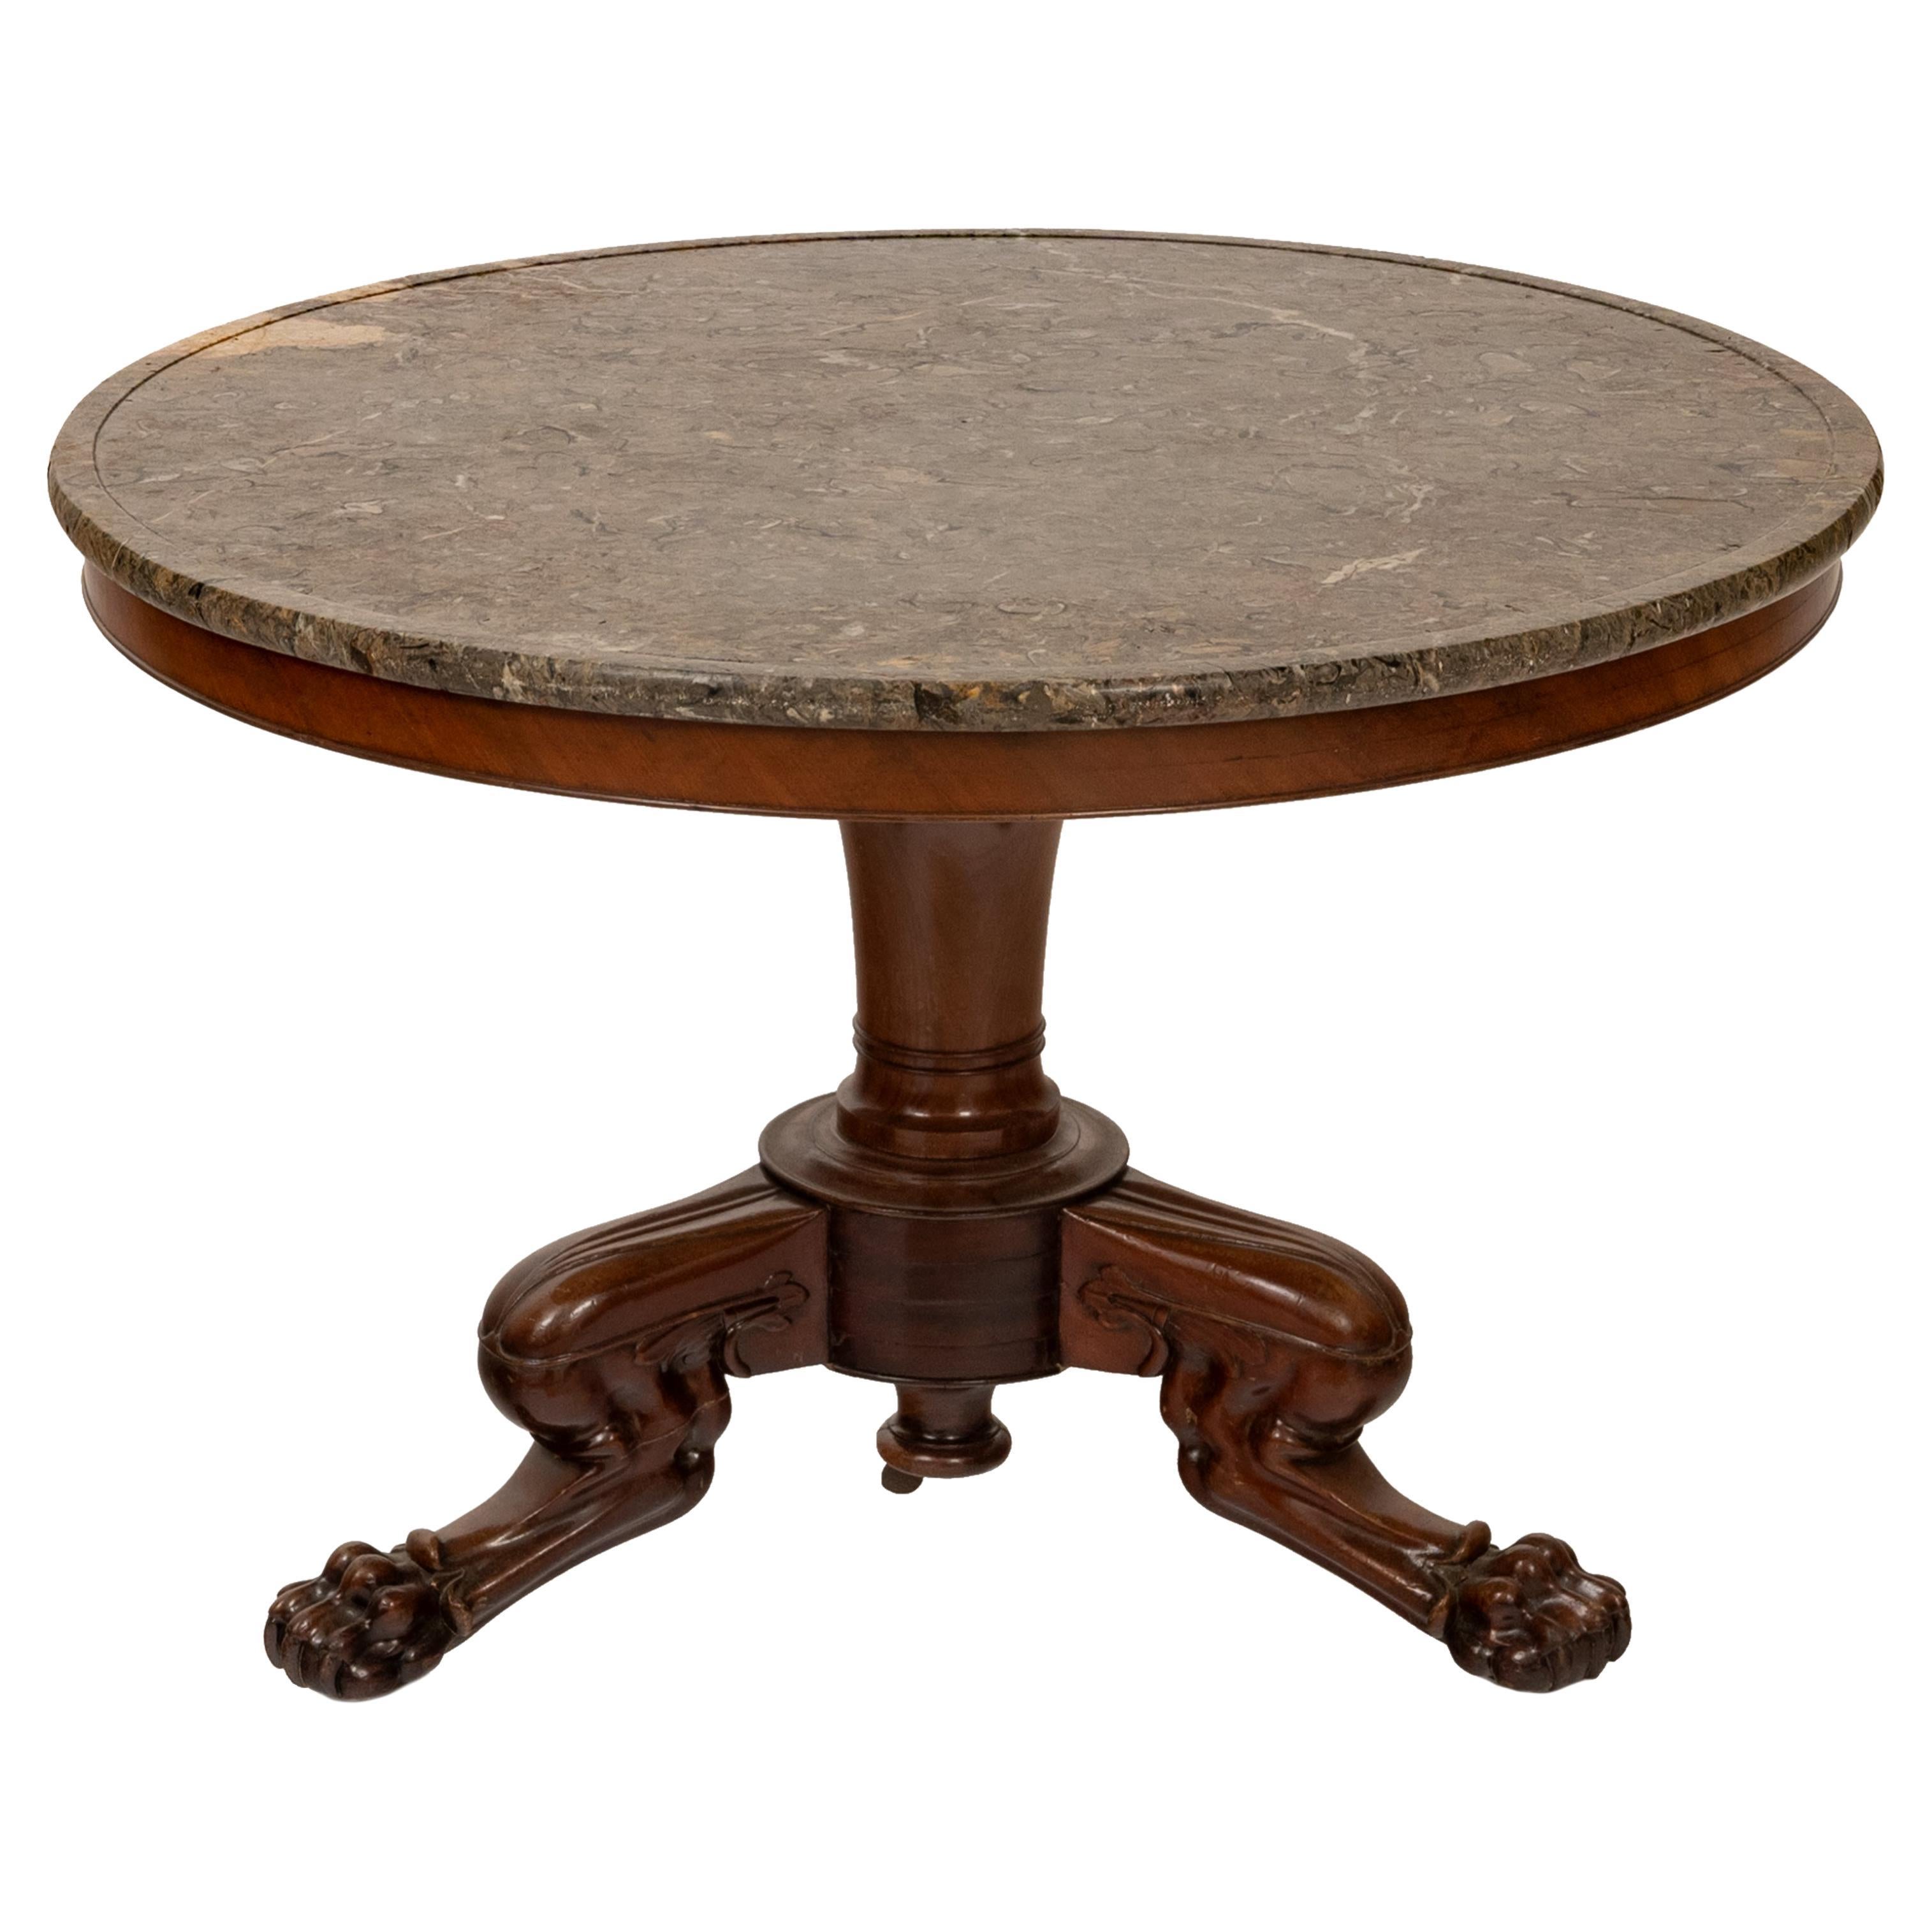 A good antique French carved mahogany & marble topped Louis Philippe center table, circa 1850.
The table having a variegated round marble top over a carved pedestal base, the table raised on a tripod base with carved lion's paw feet.
Condition is